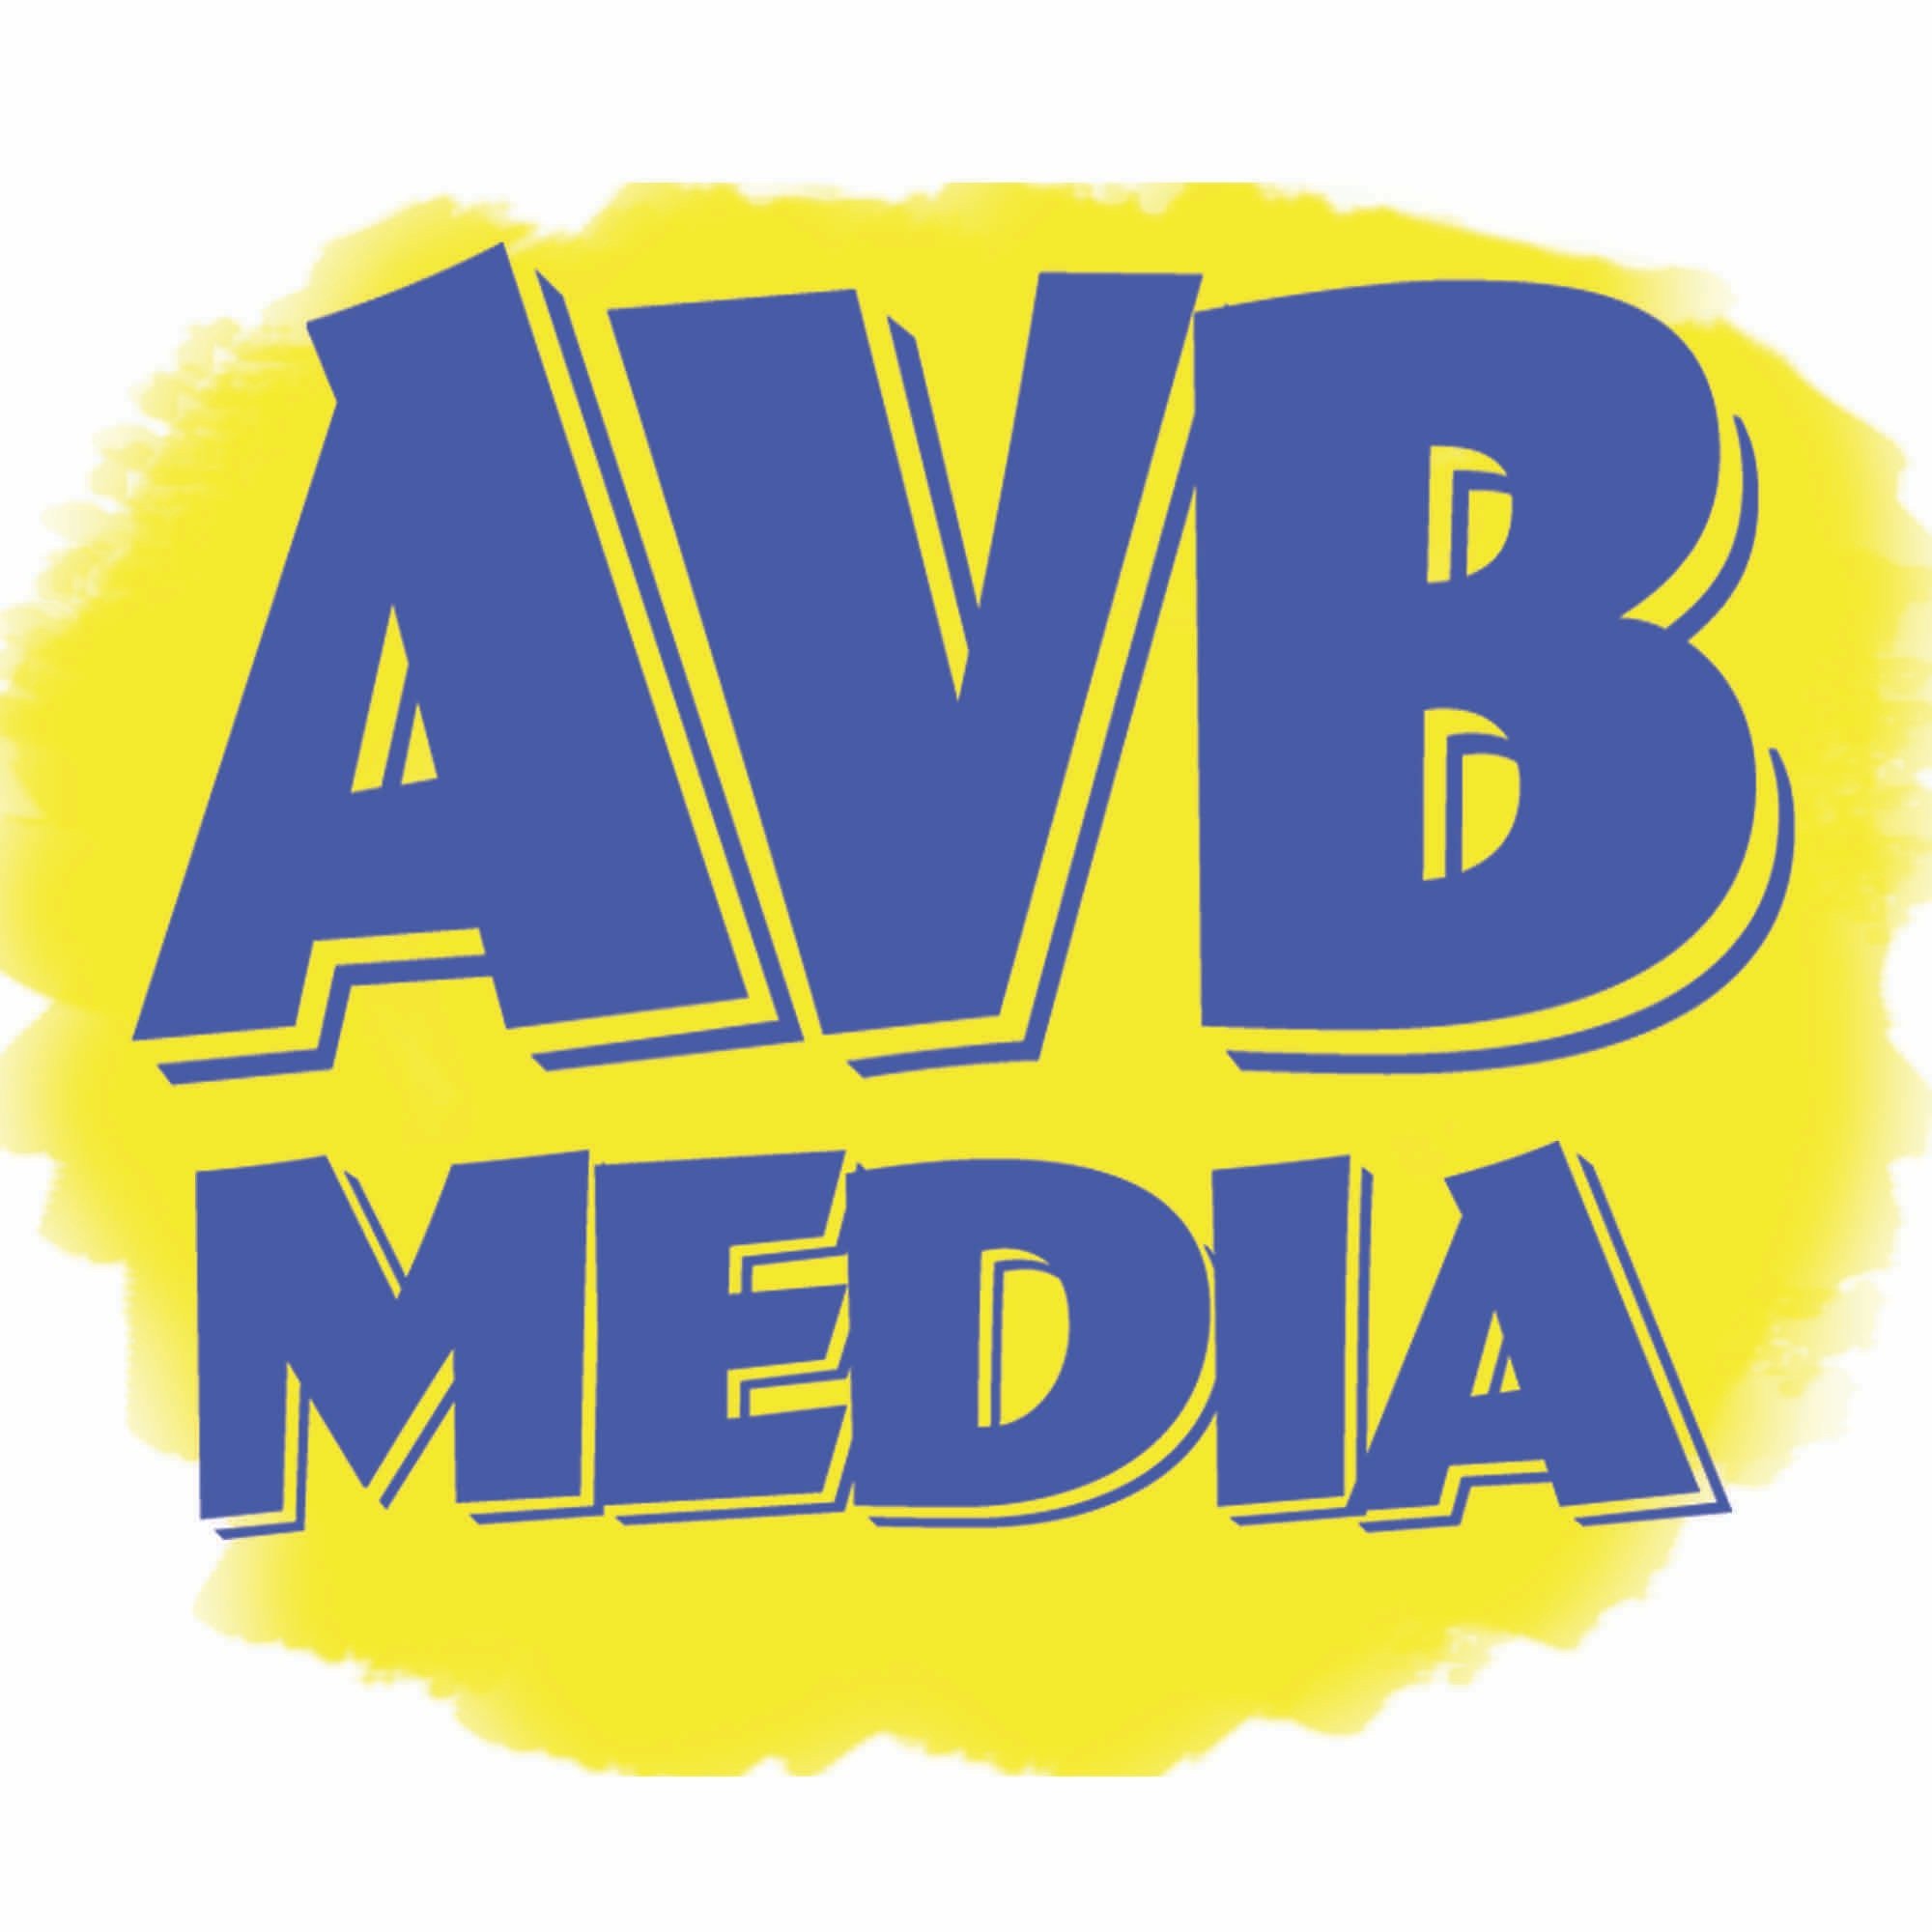 Freelance photographer, videographer and social media co-ordinator for sports clubs, events and businesses across the North East. #AVBMedia